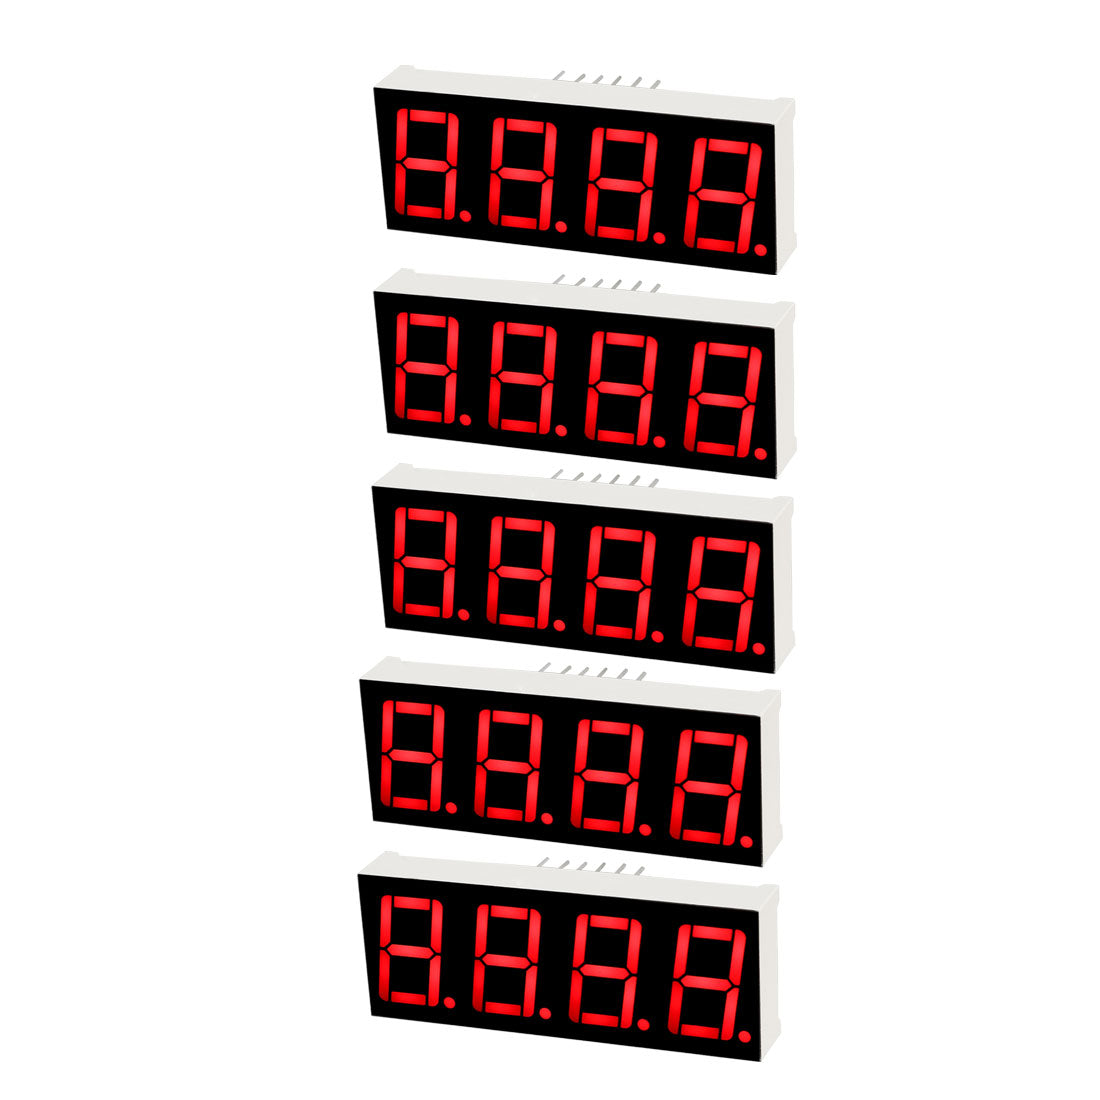 Uxcell Uxcell Common Anode 12Pin 4 Bit 7 Segment 1.98 x 0.75 x 0.31 Inch 0.55" Red LED Display Digital Tube 2pcs